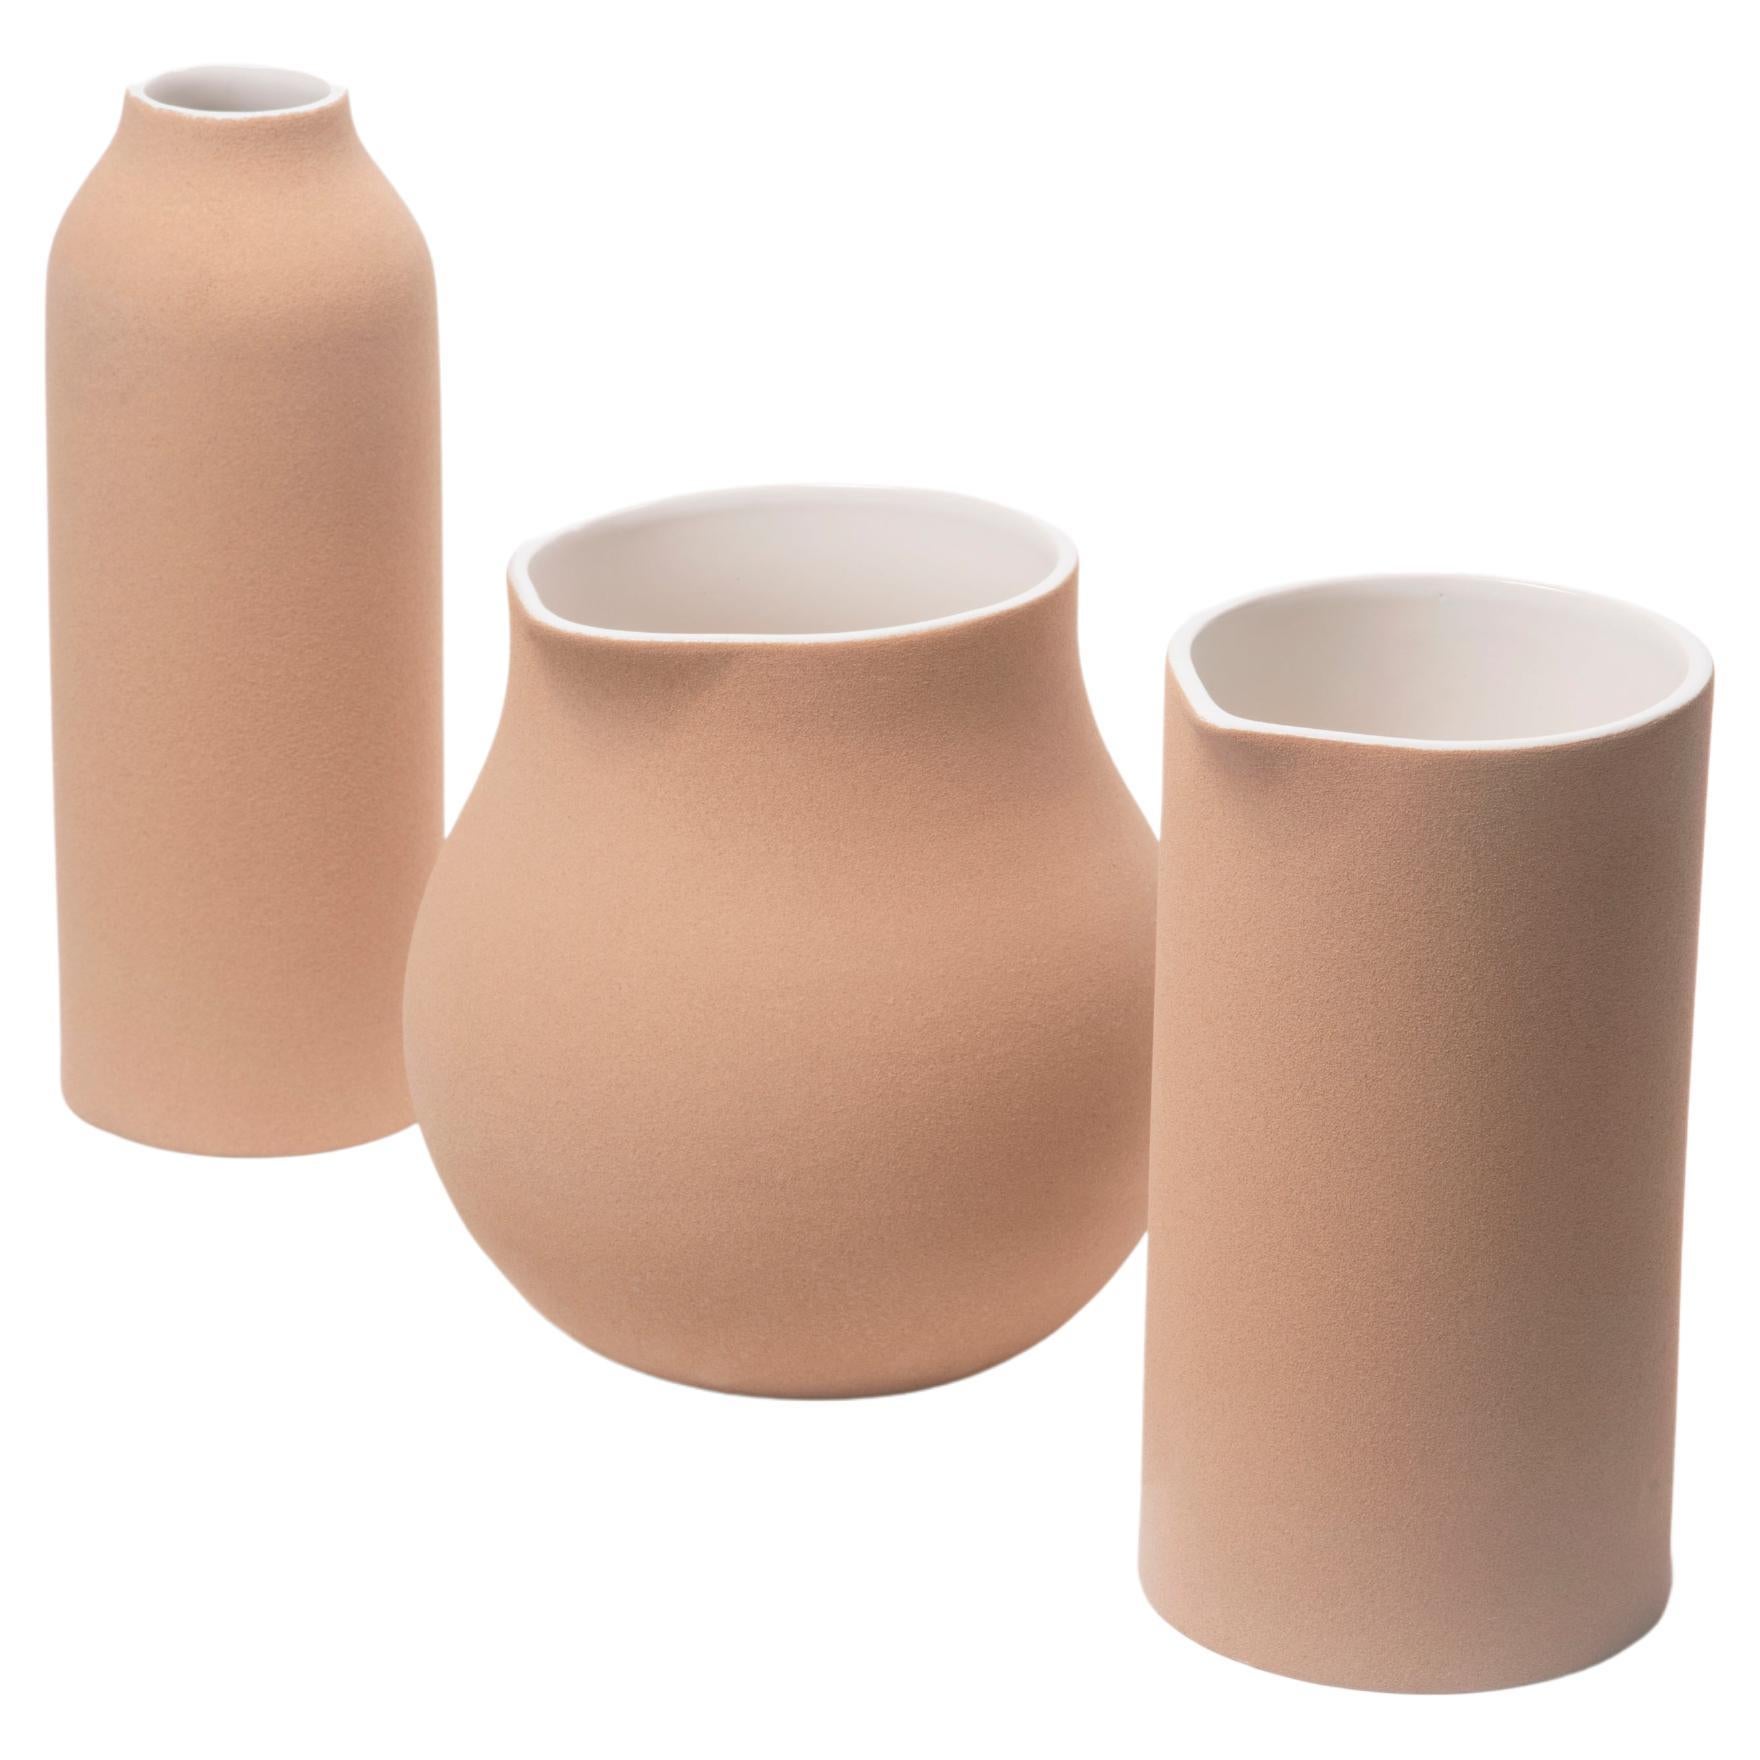 Set of Three Beige Vessels in High Temperature Stoneware and Clay